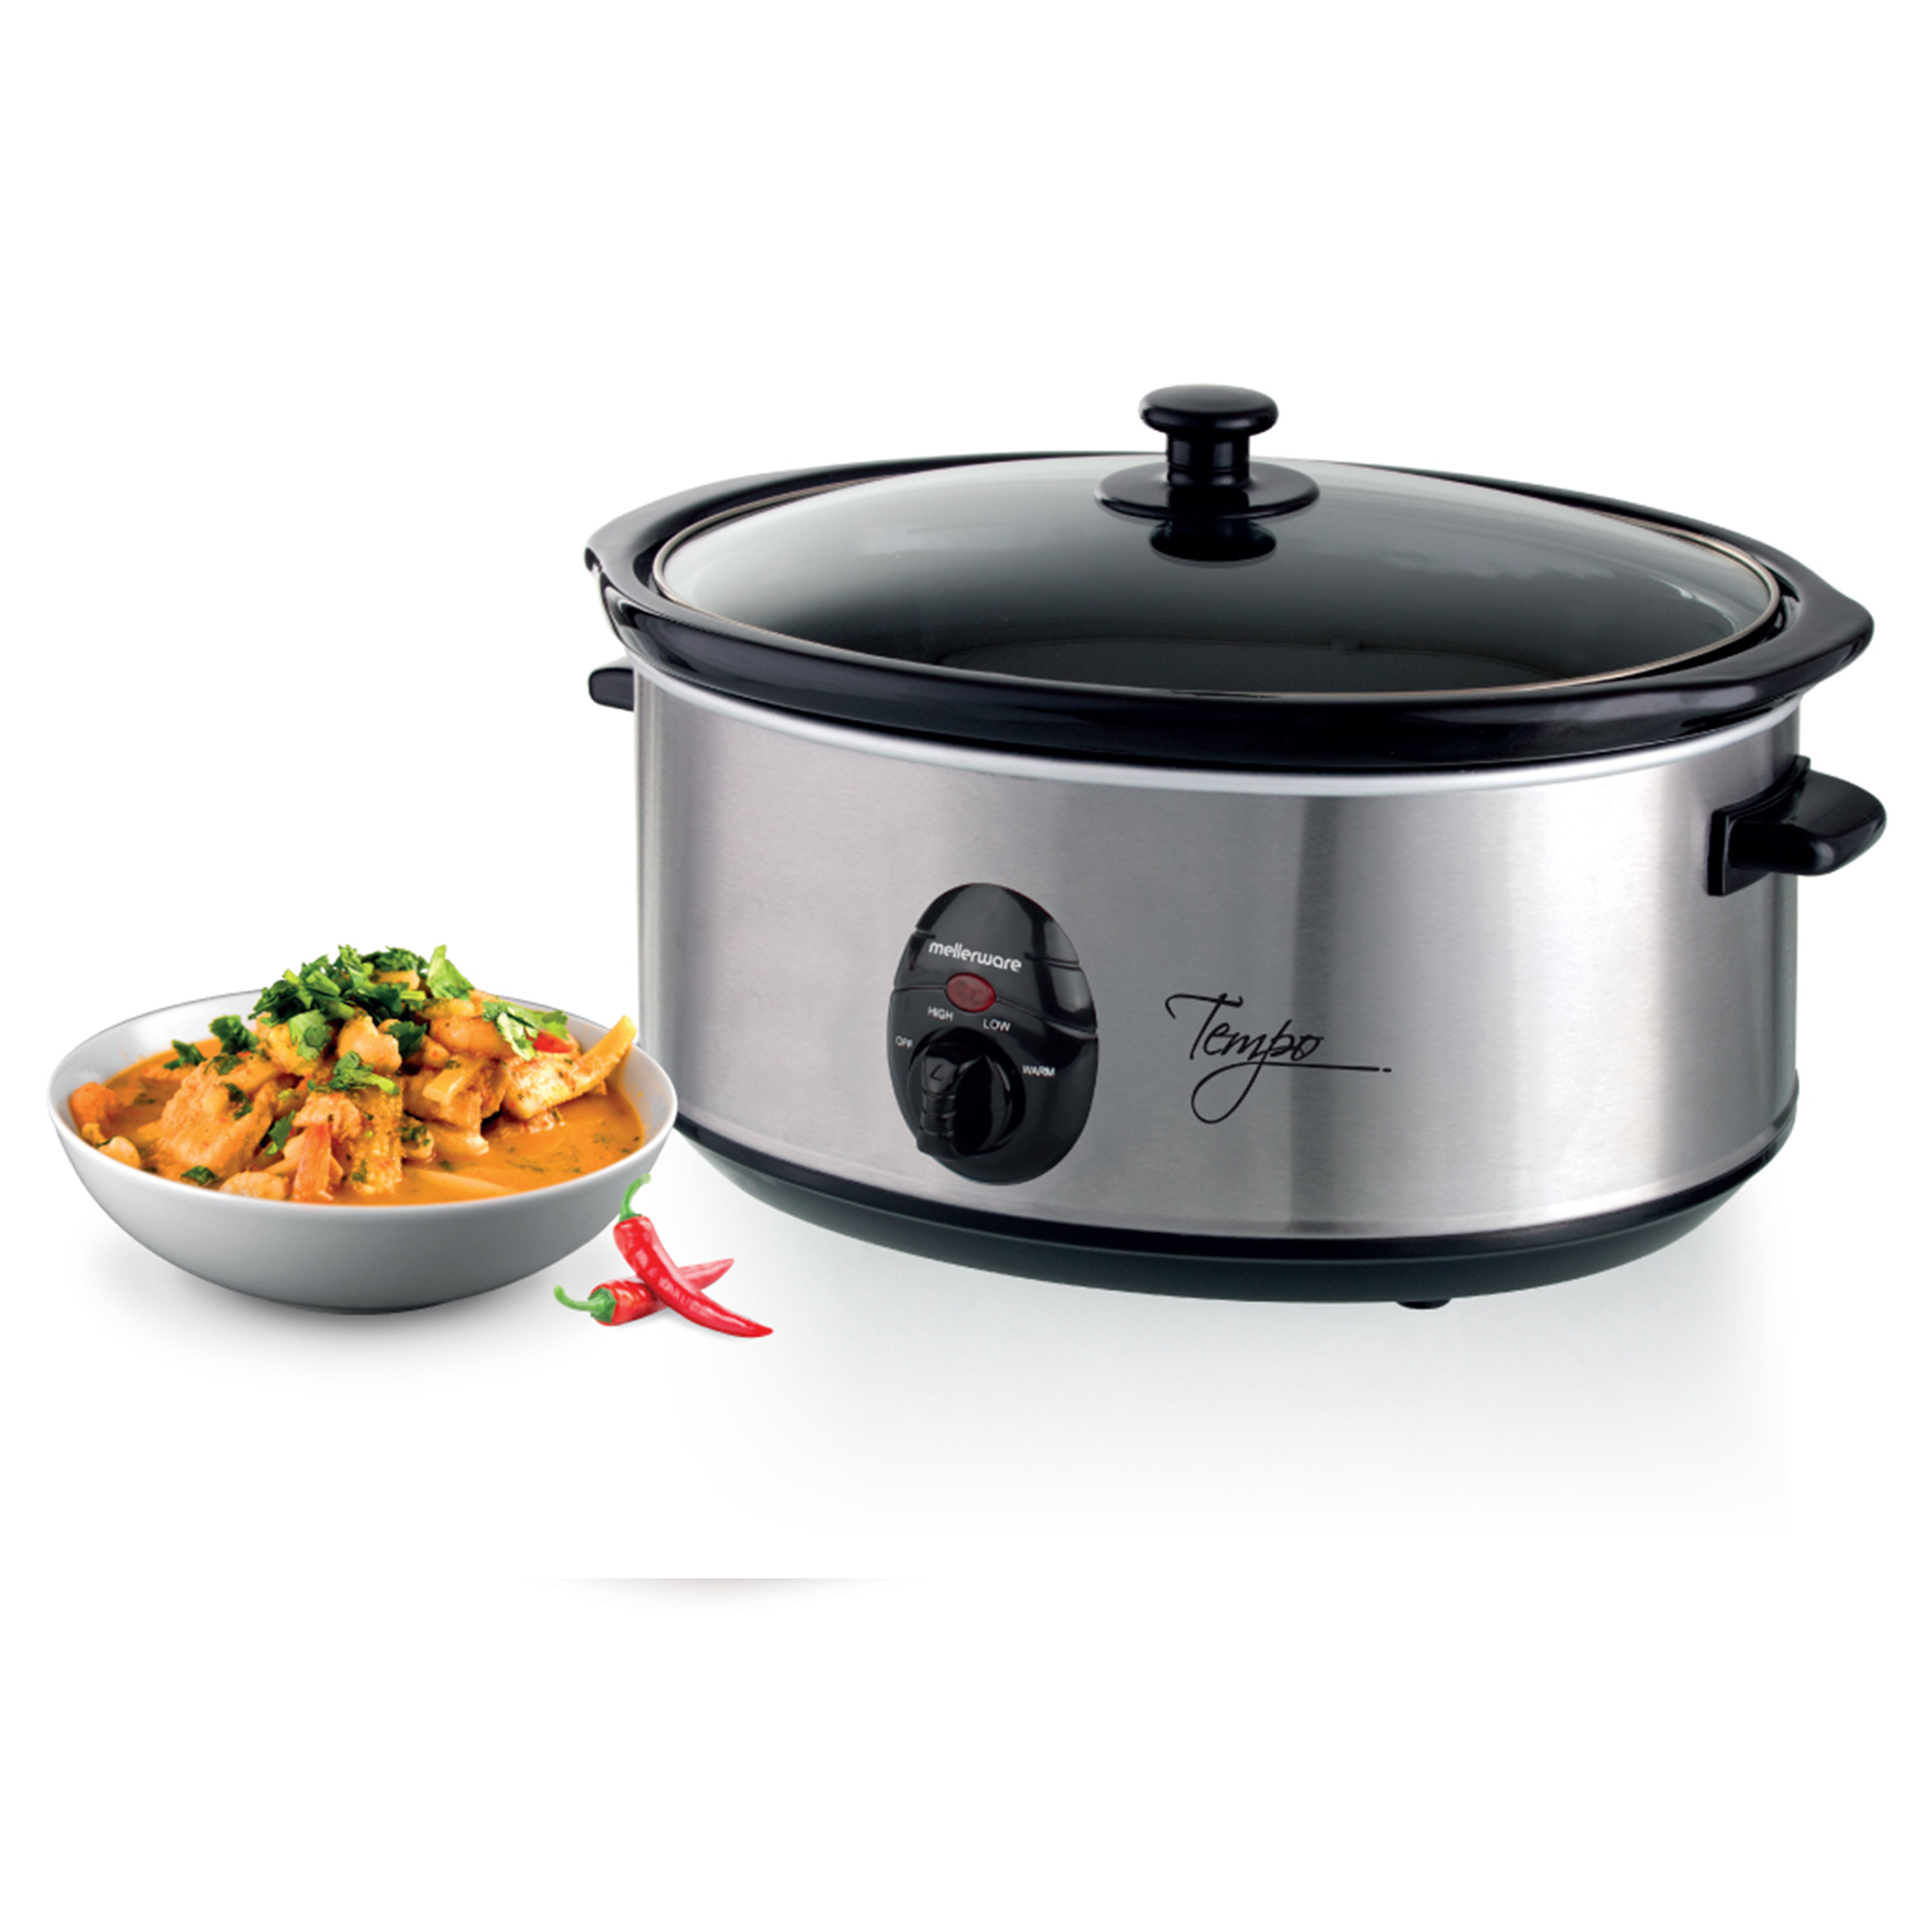 Mellerware Slow Cooker Stainless Steel Brushed 3. 240W "Tempo"